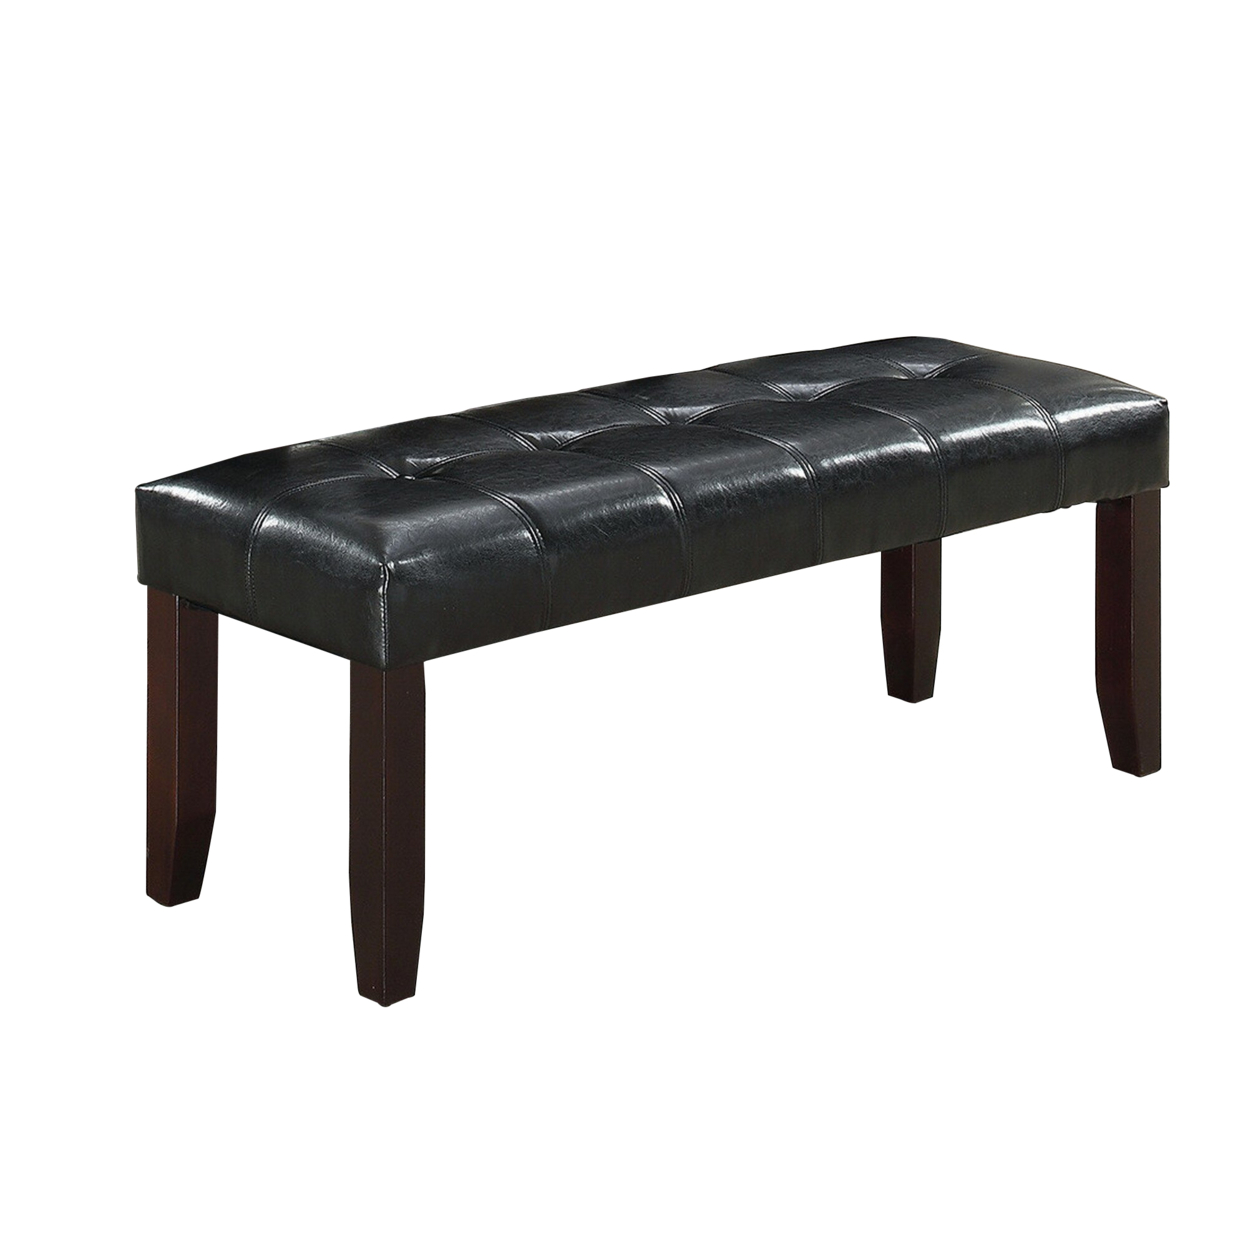 Dining Bench With Faux Leather Upholstery And Chamfered Feet, Black- Saltoro Sherpi